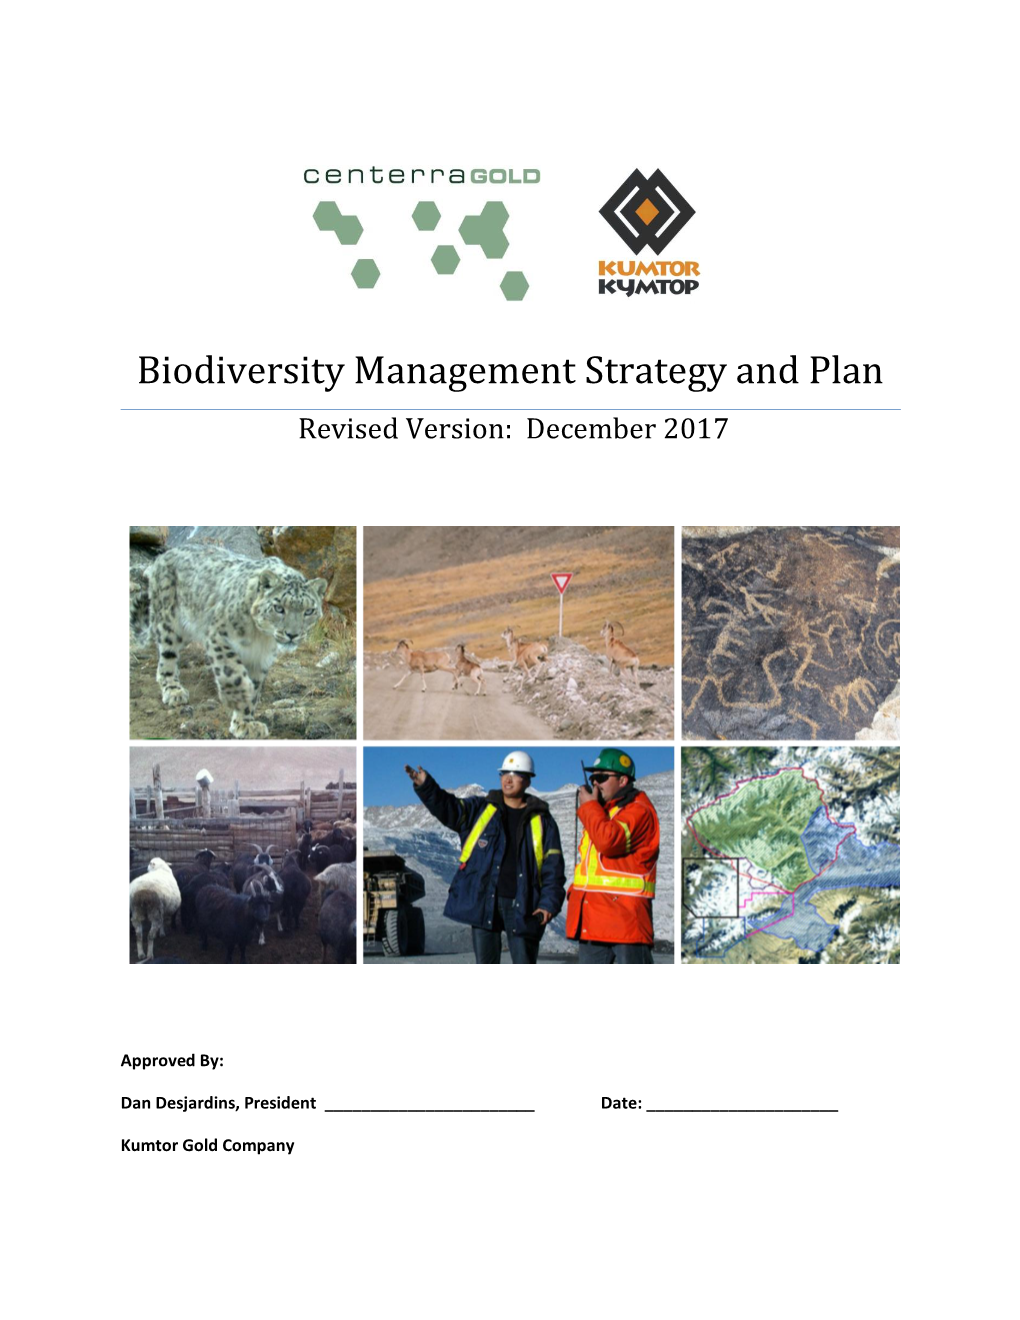 Biodiversity Management Strategy and Plan Revised Version: December 2017